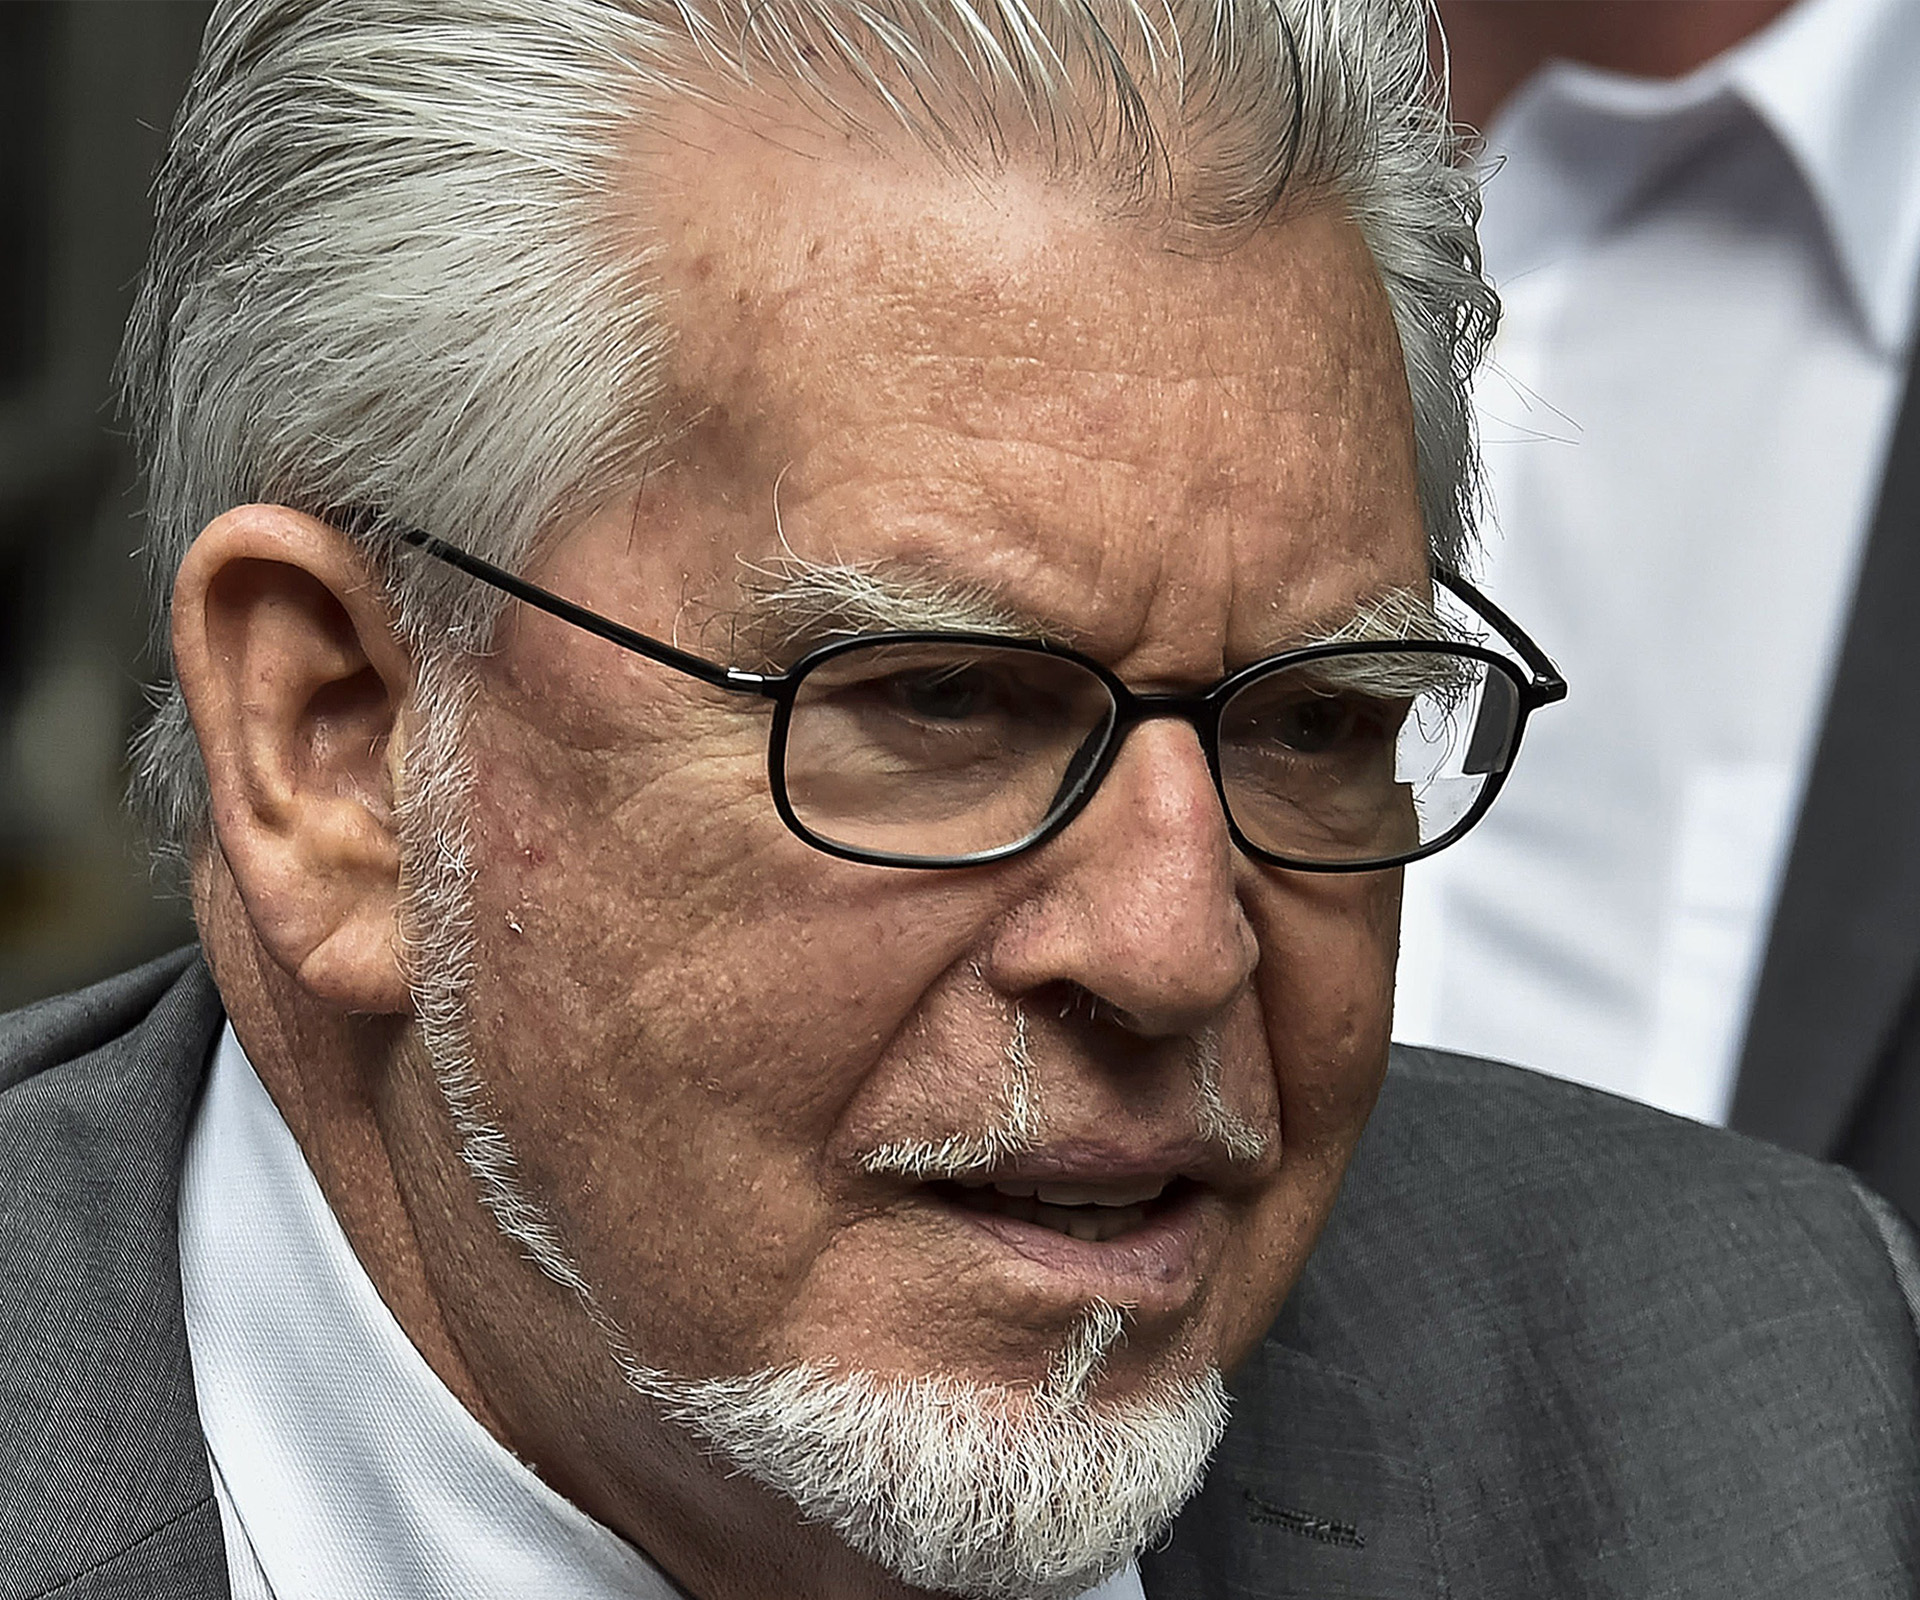 Rolf Harris has been released from prison on bail to face trial for indecent assault.